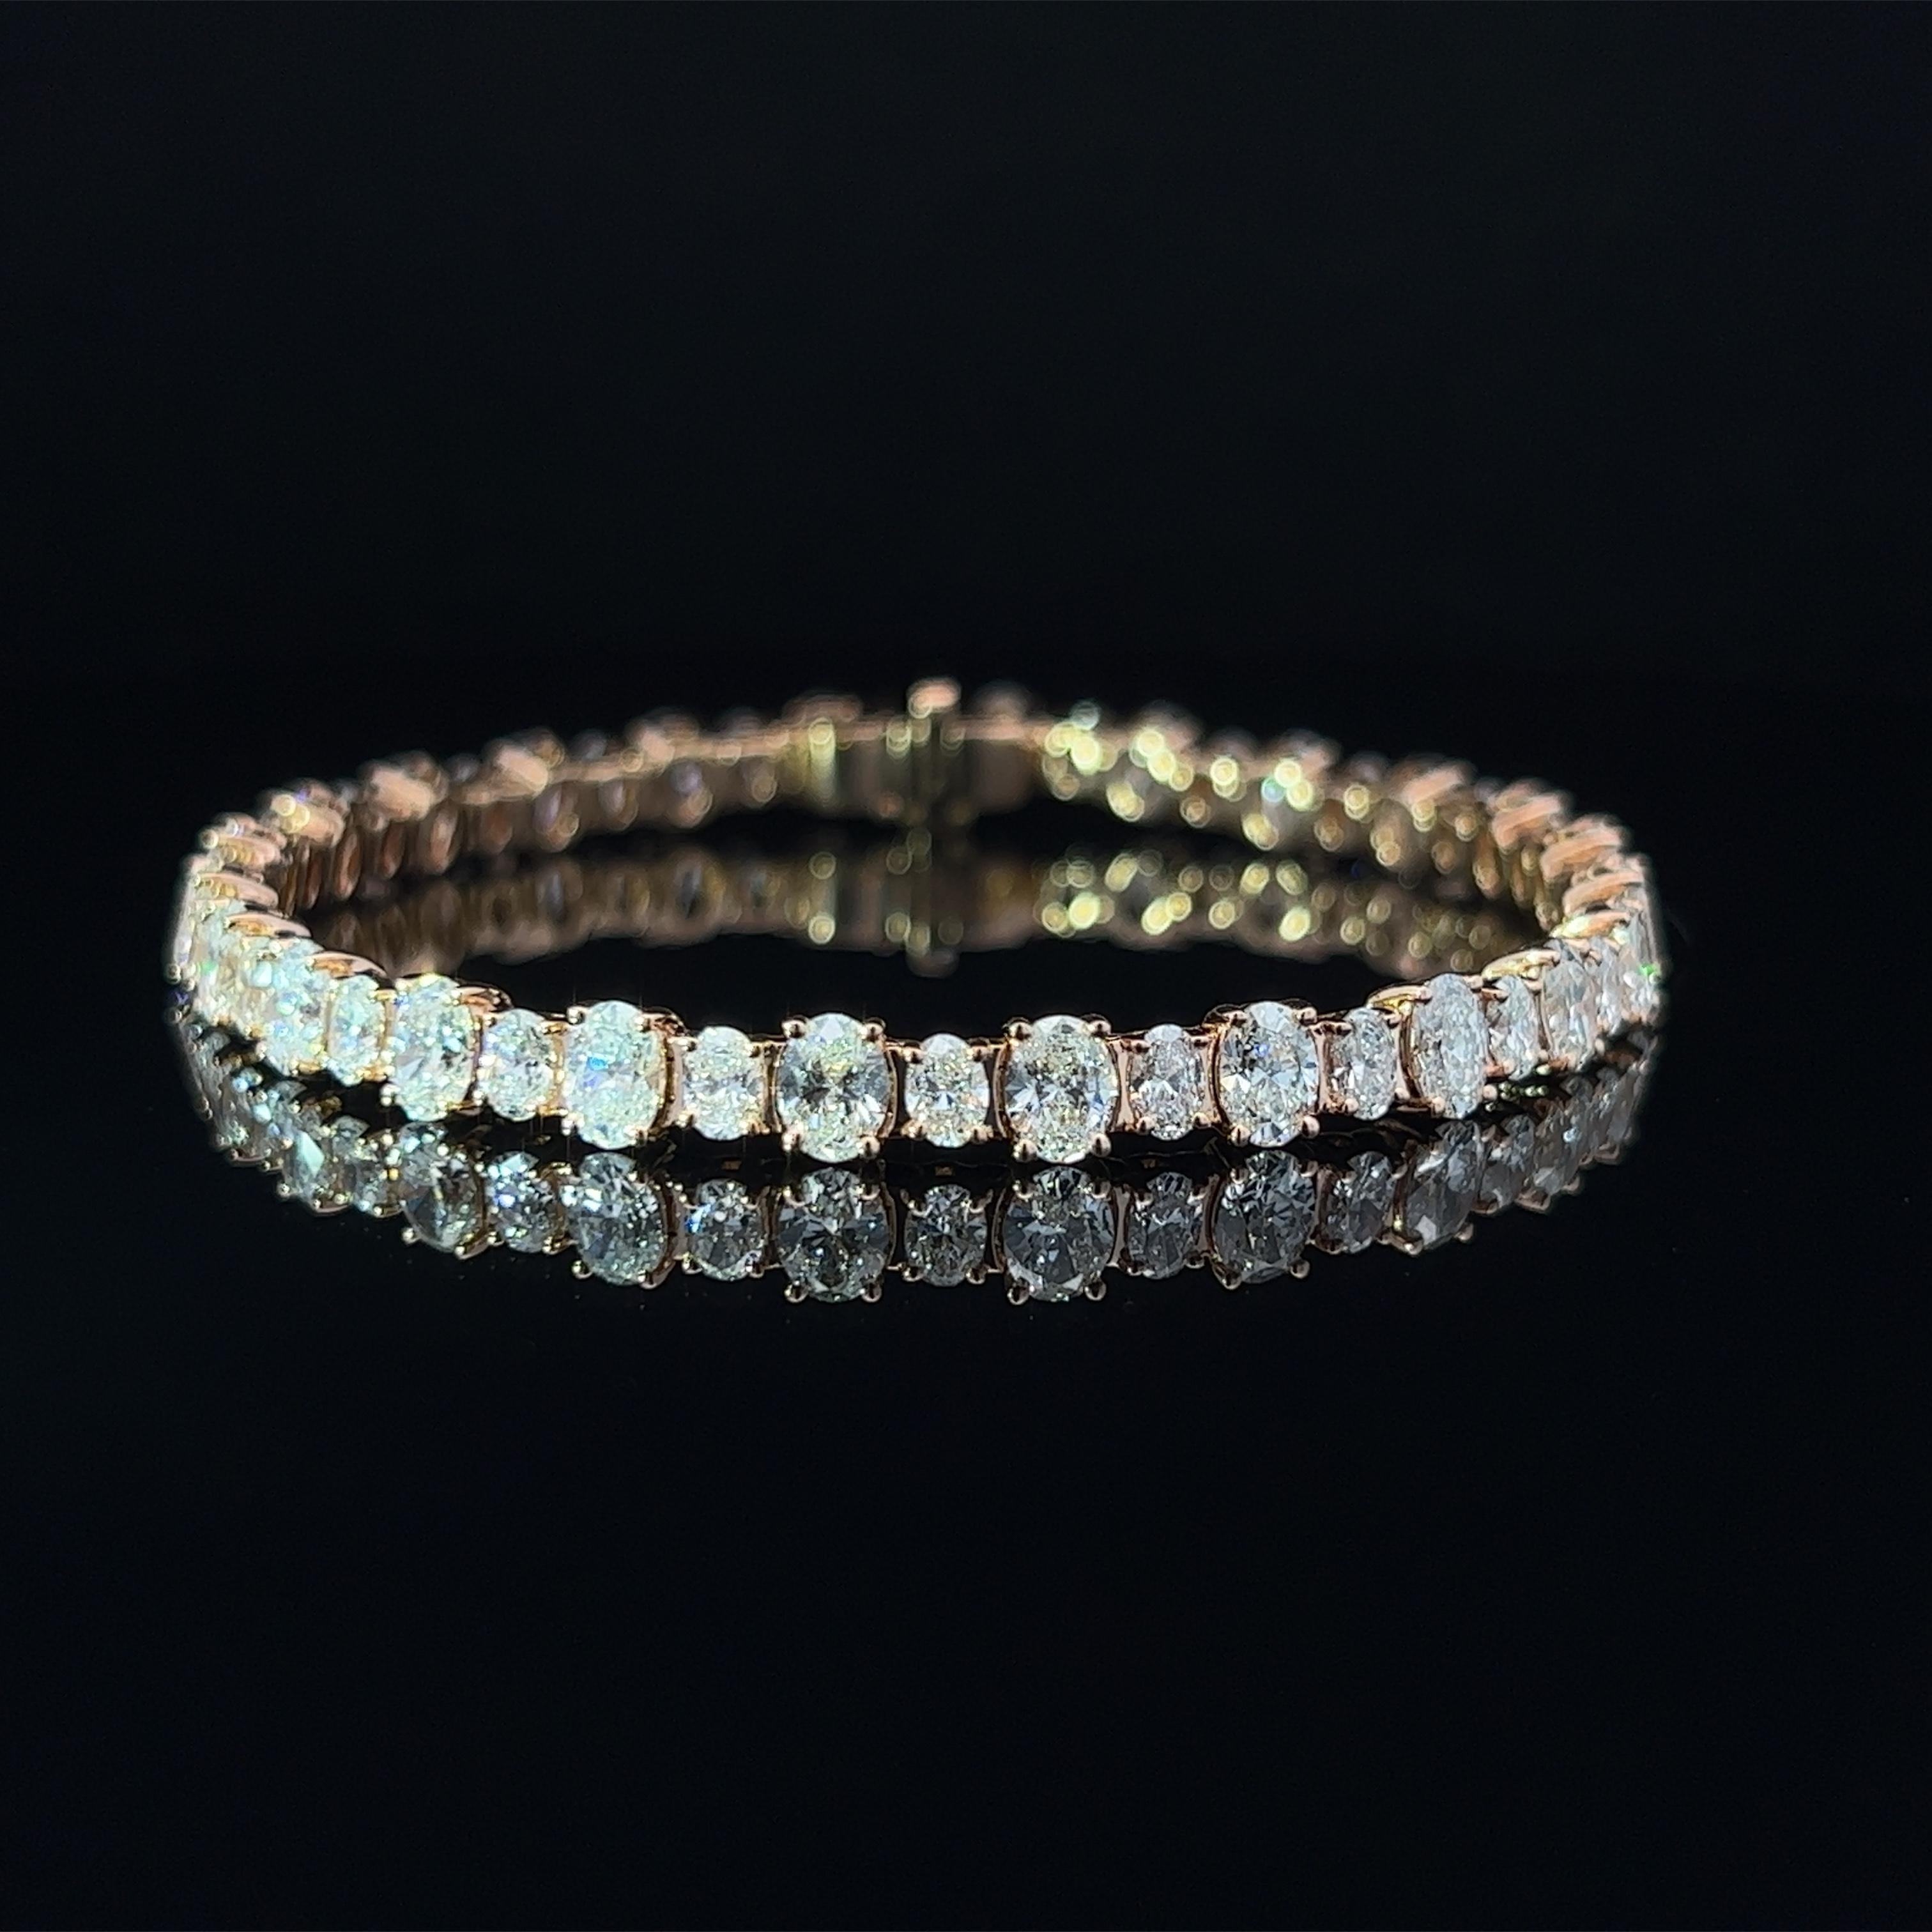 Diamond Shape: Oval Cut 
Total Diamond Weight: 10.57ct
Individual Diamond Weight: .33ct & .15ct
Color/Clarity: GH VVS  
Metal: 18K Rose Gold  
Metal Weight: 16.52g 

Key Features:

Oval-Cut Diamonds: The centerpiece of this bracelet showcases a